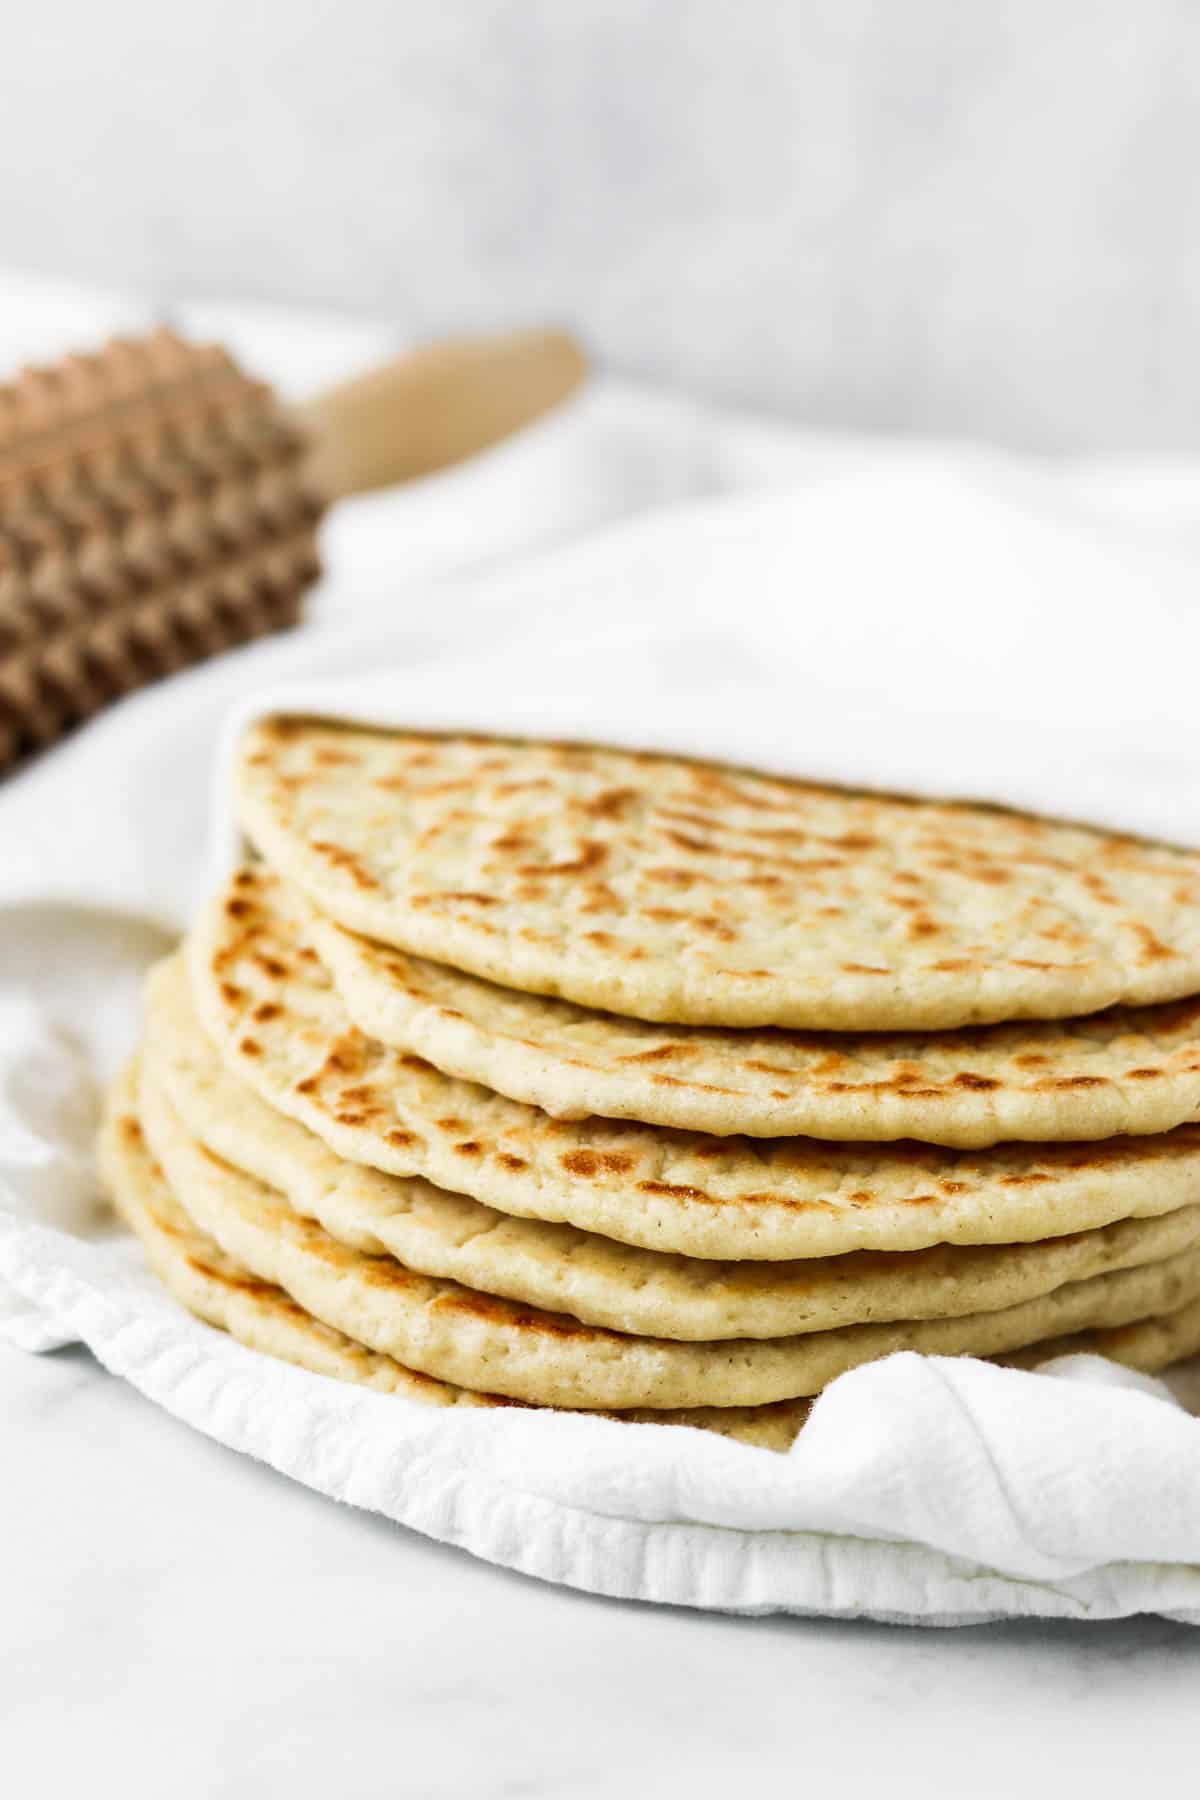 Stack of flatbreads on a towel.